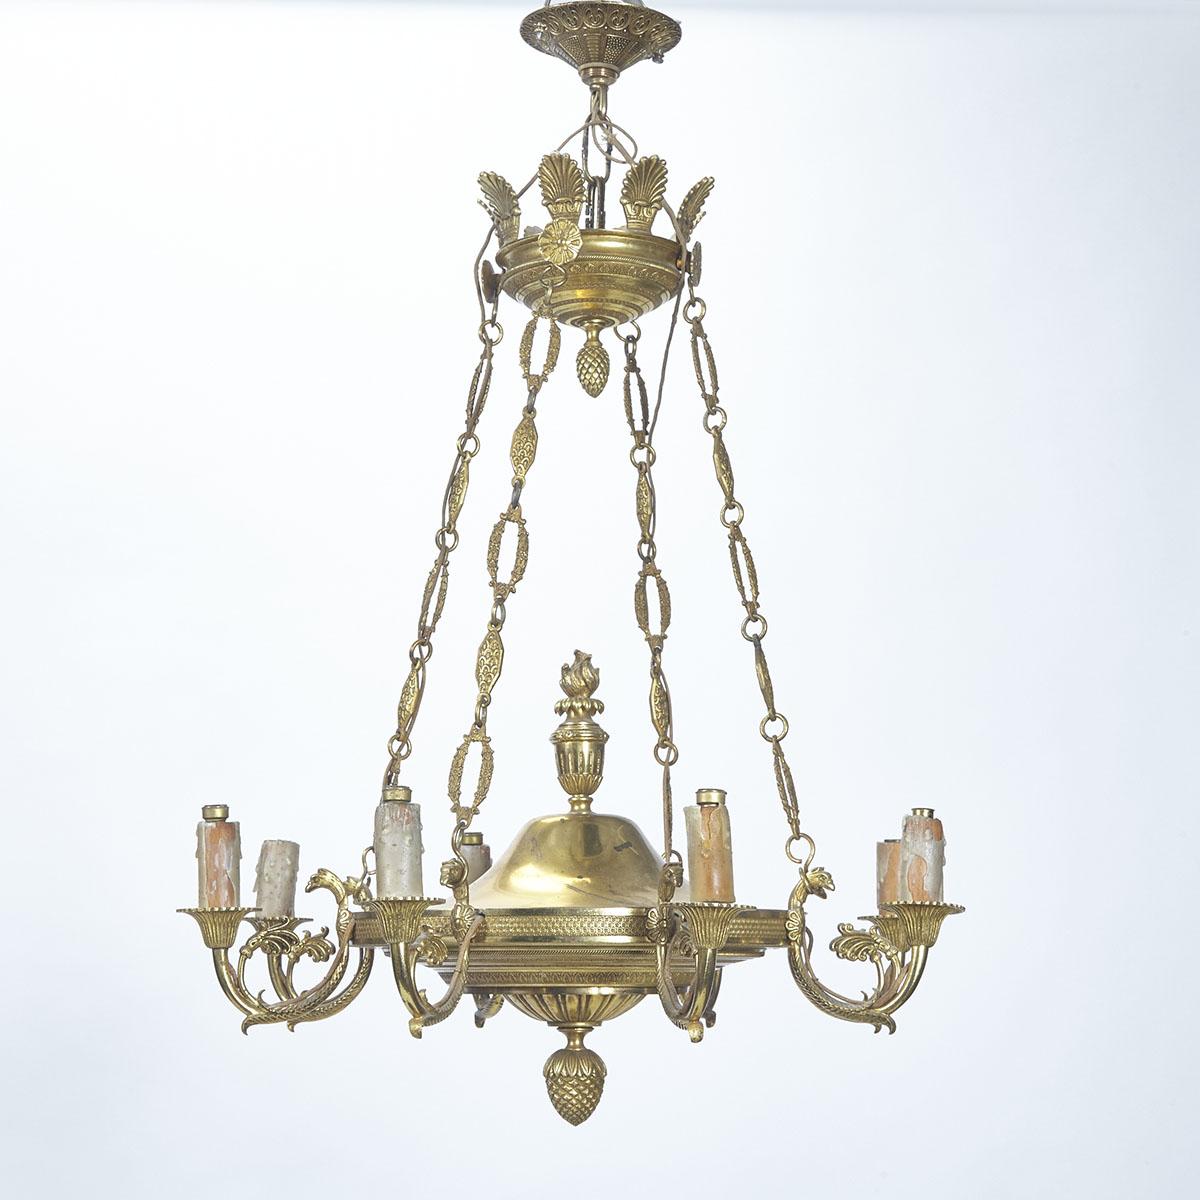 French Empire Style Gilt Bronze Eight Light Chandelier, 19th/early 20th century